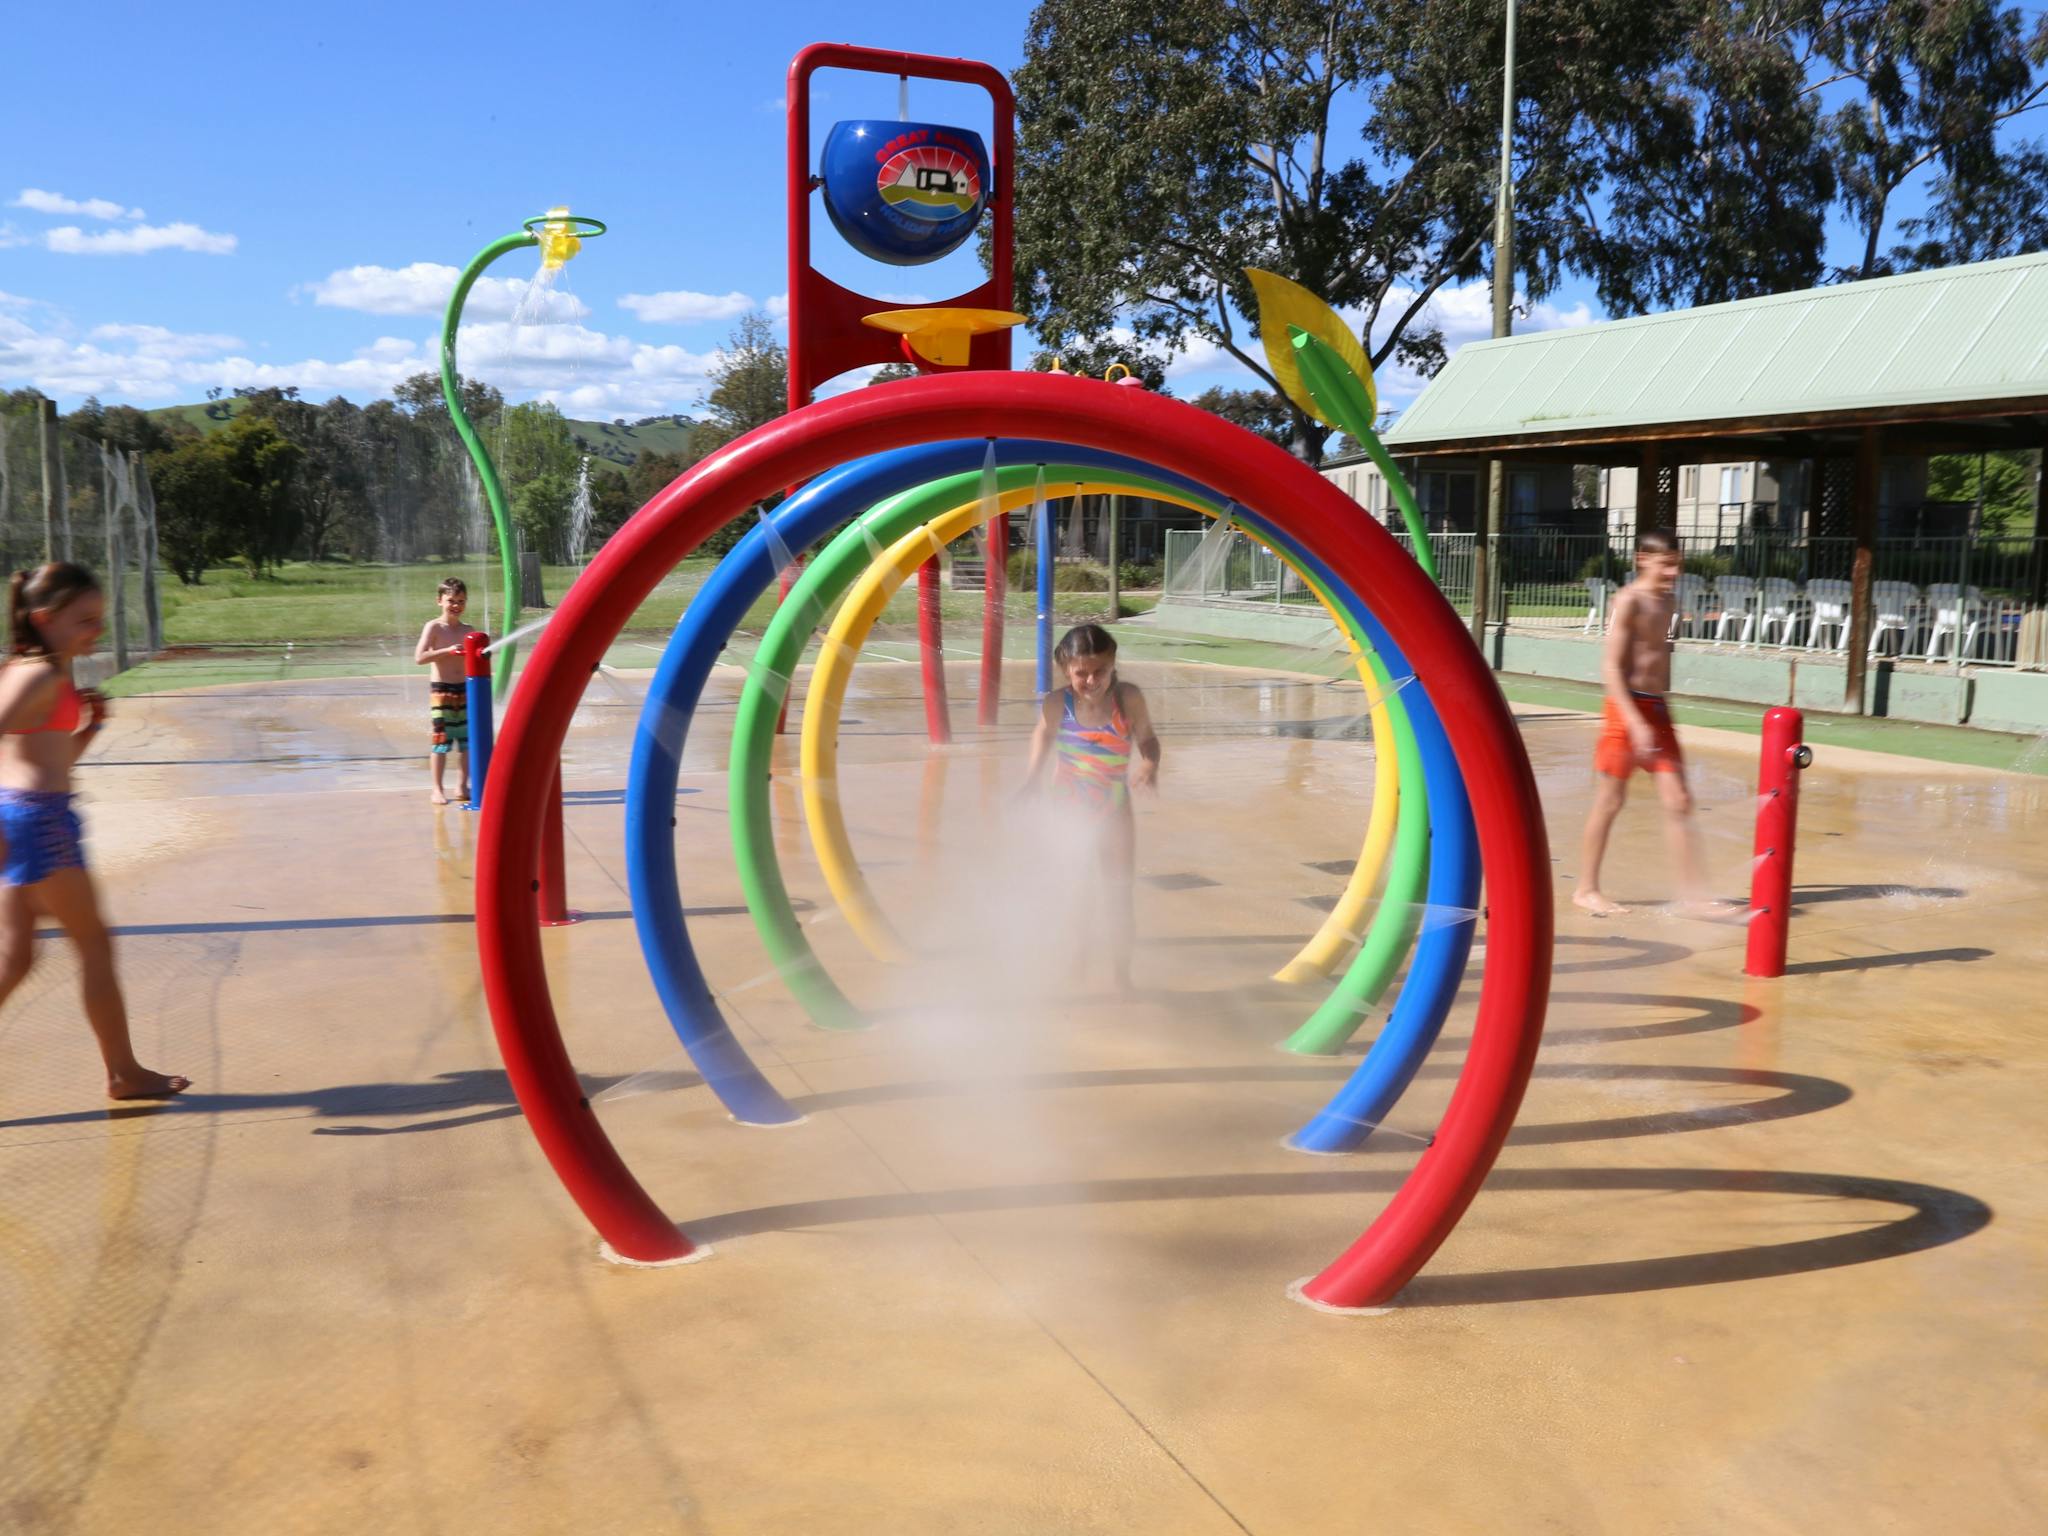 The waterspray Park is enjoyed by all the family